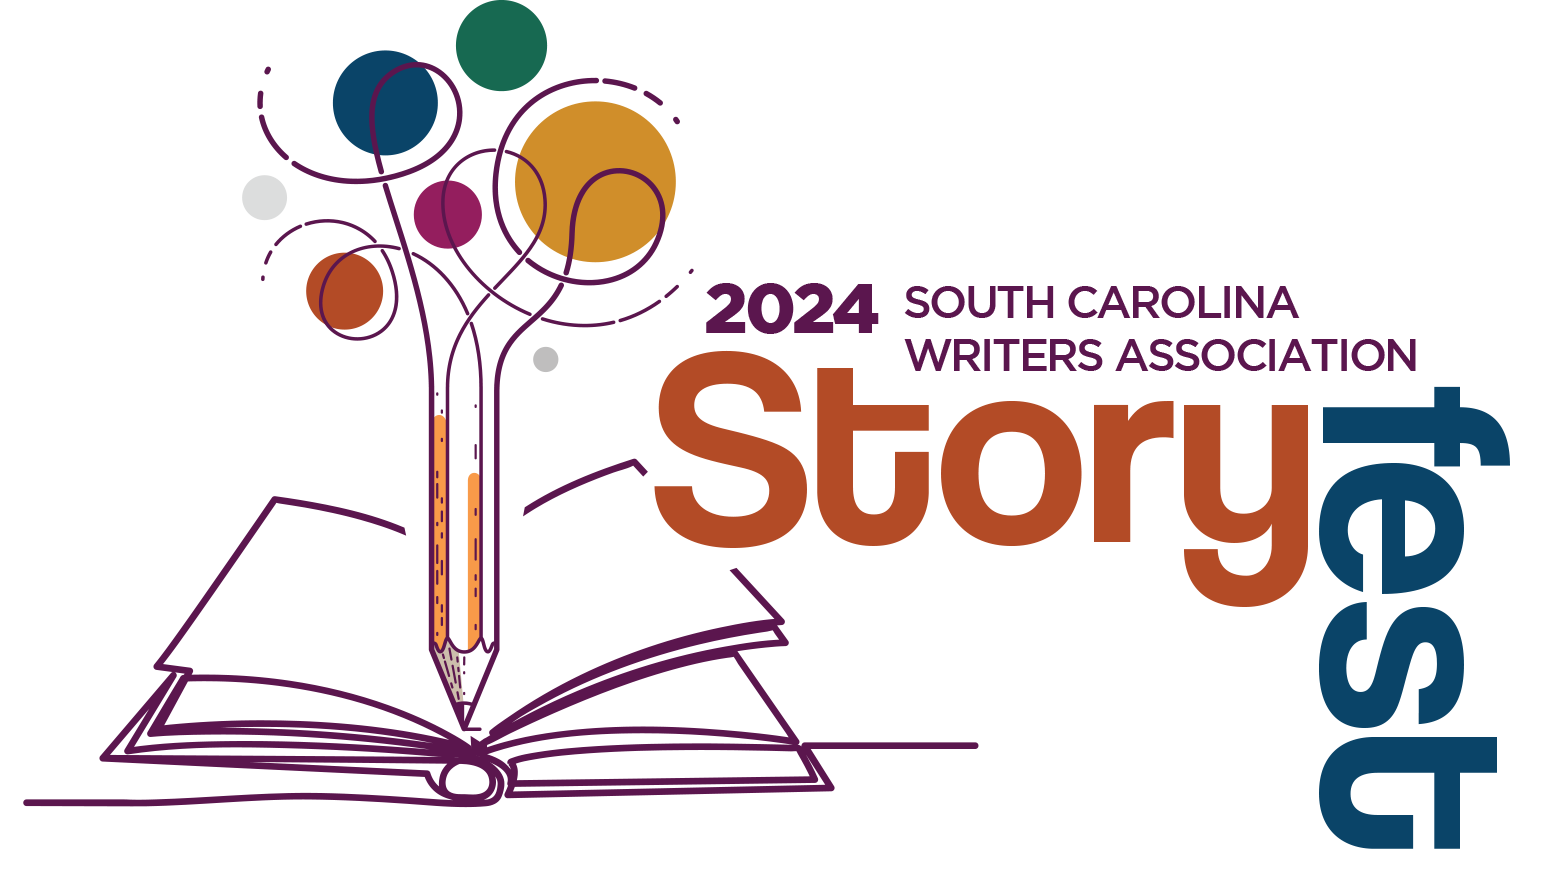 2024 Storyfest logo. Open book with pencil and swirls